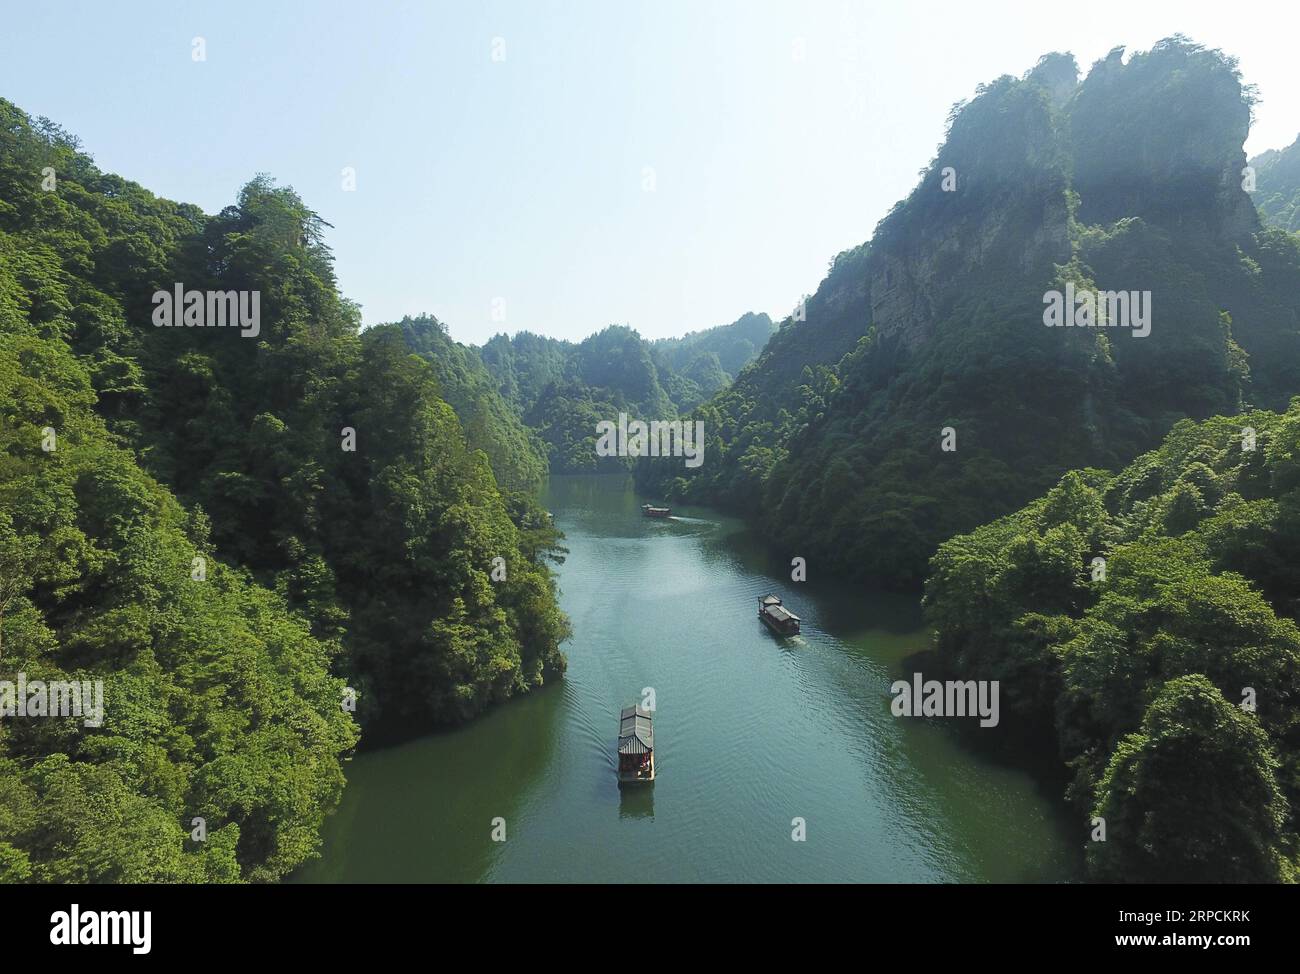 (190708) -- BEIJING, July 8, 2019 -- Aerial photo taken on June 1, 2019 shows a view of the Baofeng Lake in the Wulingyuan Scenic Area in Zhangjiajie, central China s Hunan Province. Located in central China, Hunan Province is well-known for its varied topography. It abuts the Dongting Lake to the north, and the east, south and west sides of the province are surrounded by mountains, with Wuling and Xuefeng Mountains to the west, Nanling Mountain to the south, Luoxiao and Mufu Mountains to the east. The Xiangjiang, Zijiang, Yuanjiang and Lishui Rivers converge on the Yangtze River at the Dongti Stock Photo